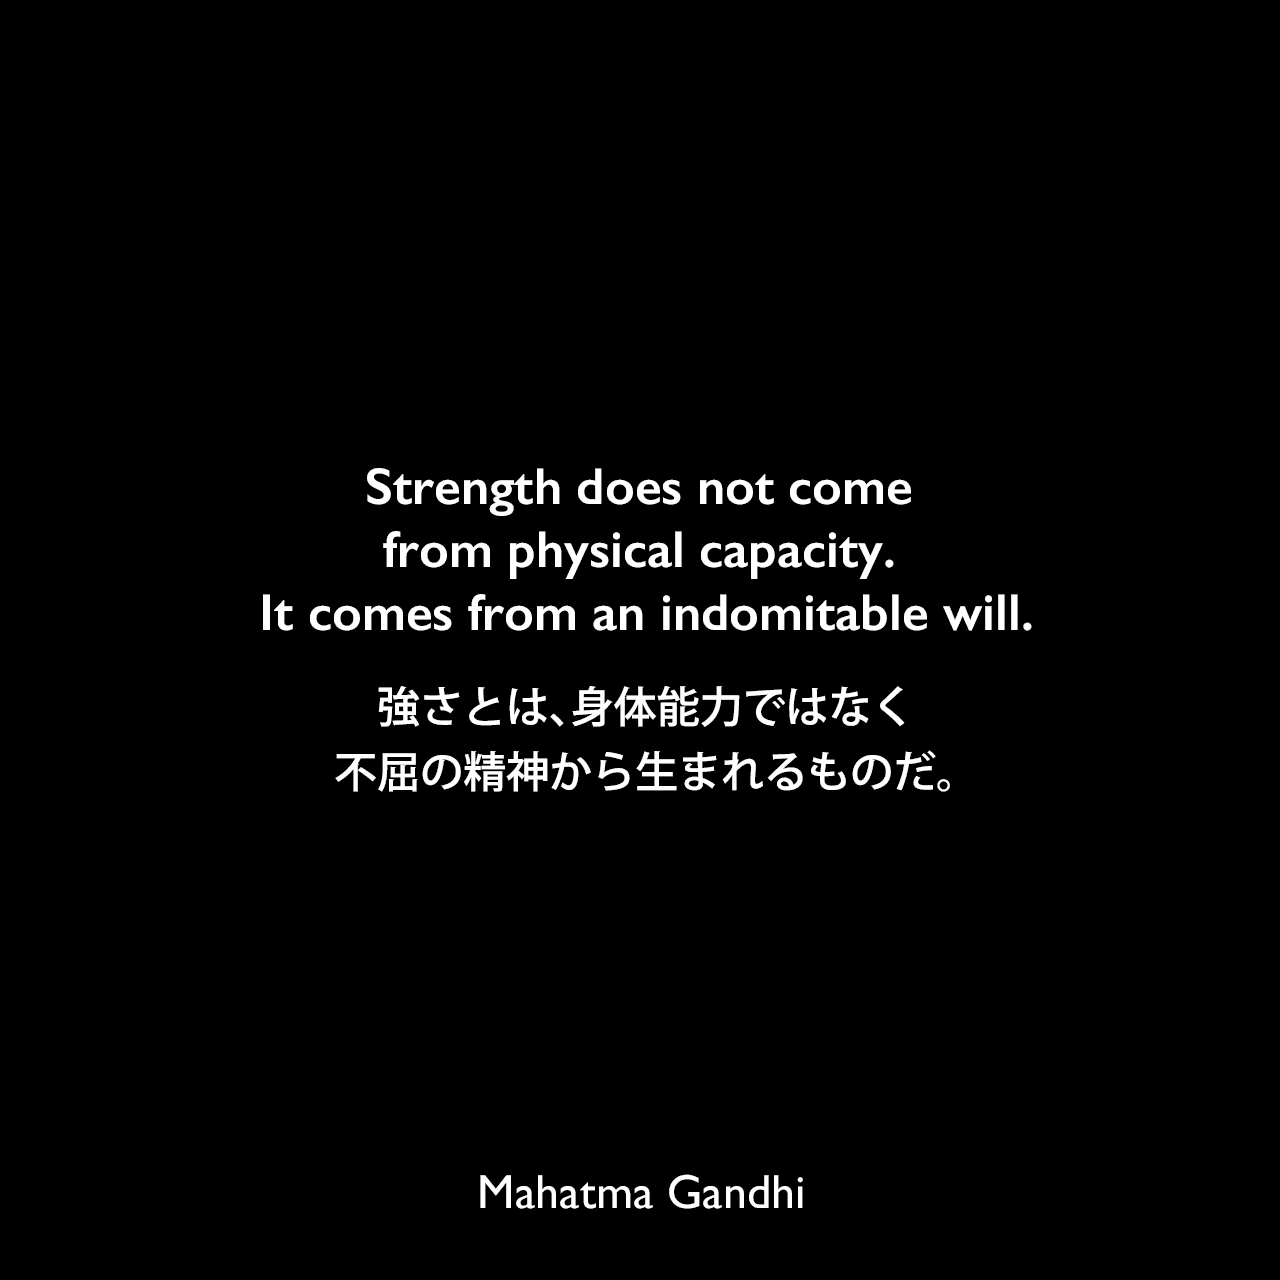 Strength does not come from physical capacity. It comes from an indomitable will.強さとは、身体能力ではなく、不屈の精神から生まれるものだ。Mahatma Gandhi